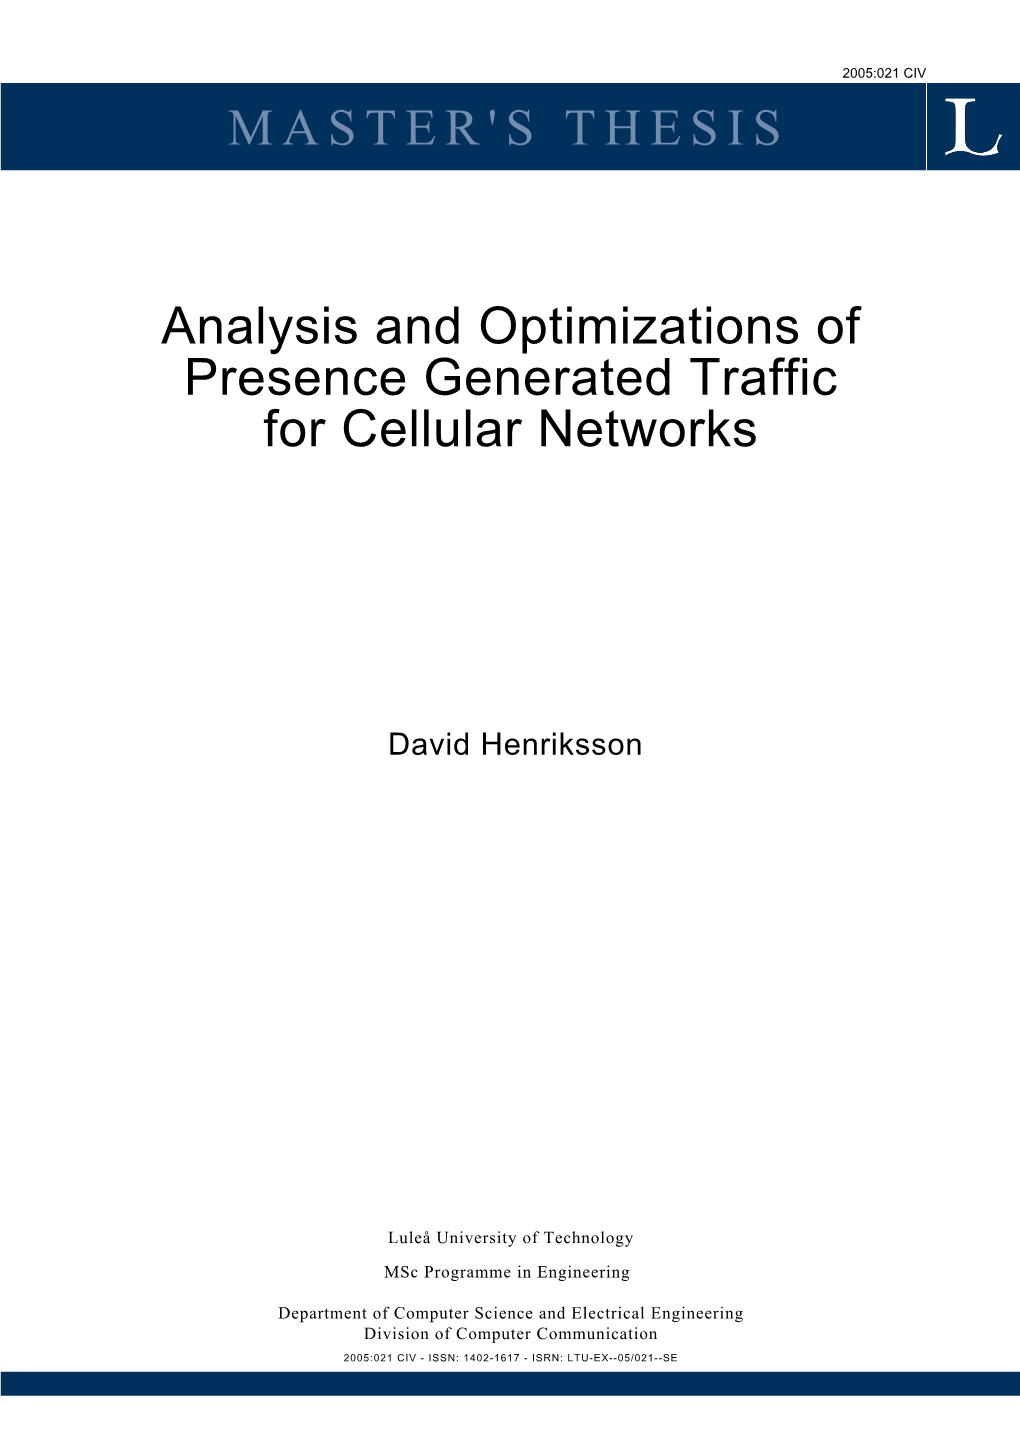 Analysis and Optimizations of Presence Generated Traffic for Cellular Networks